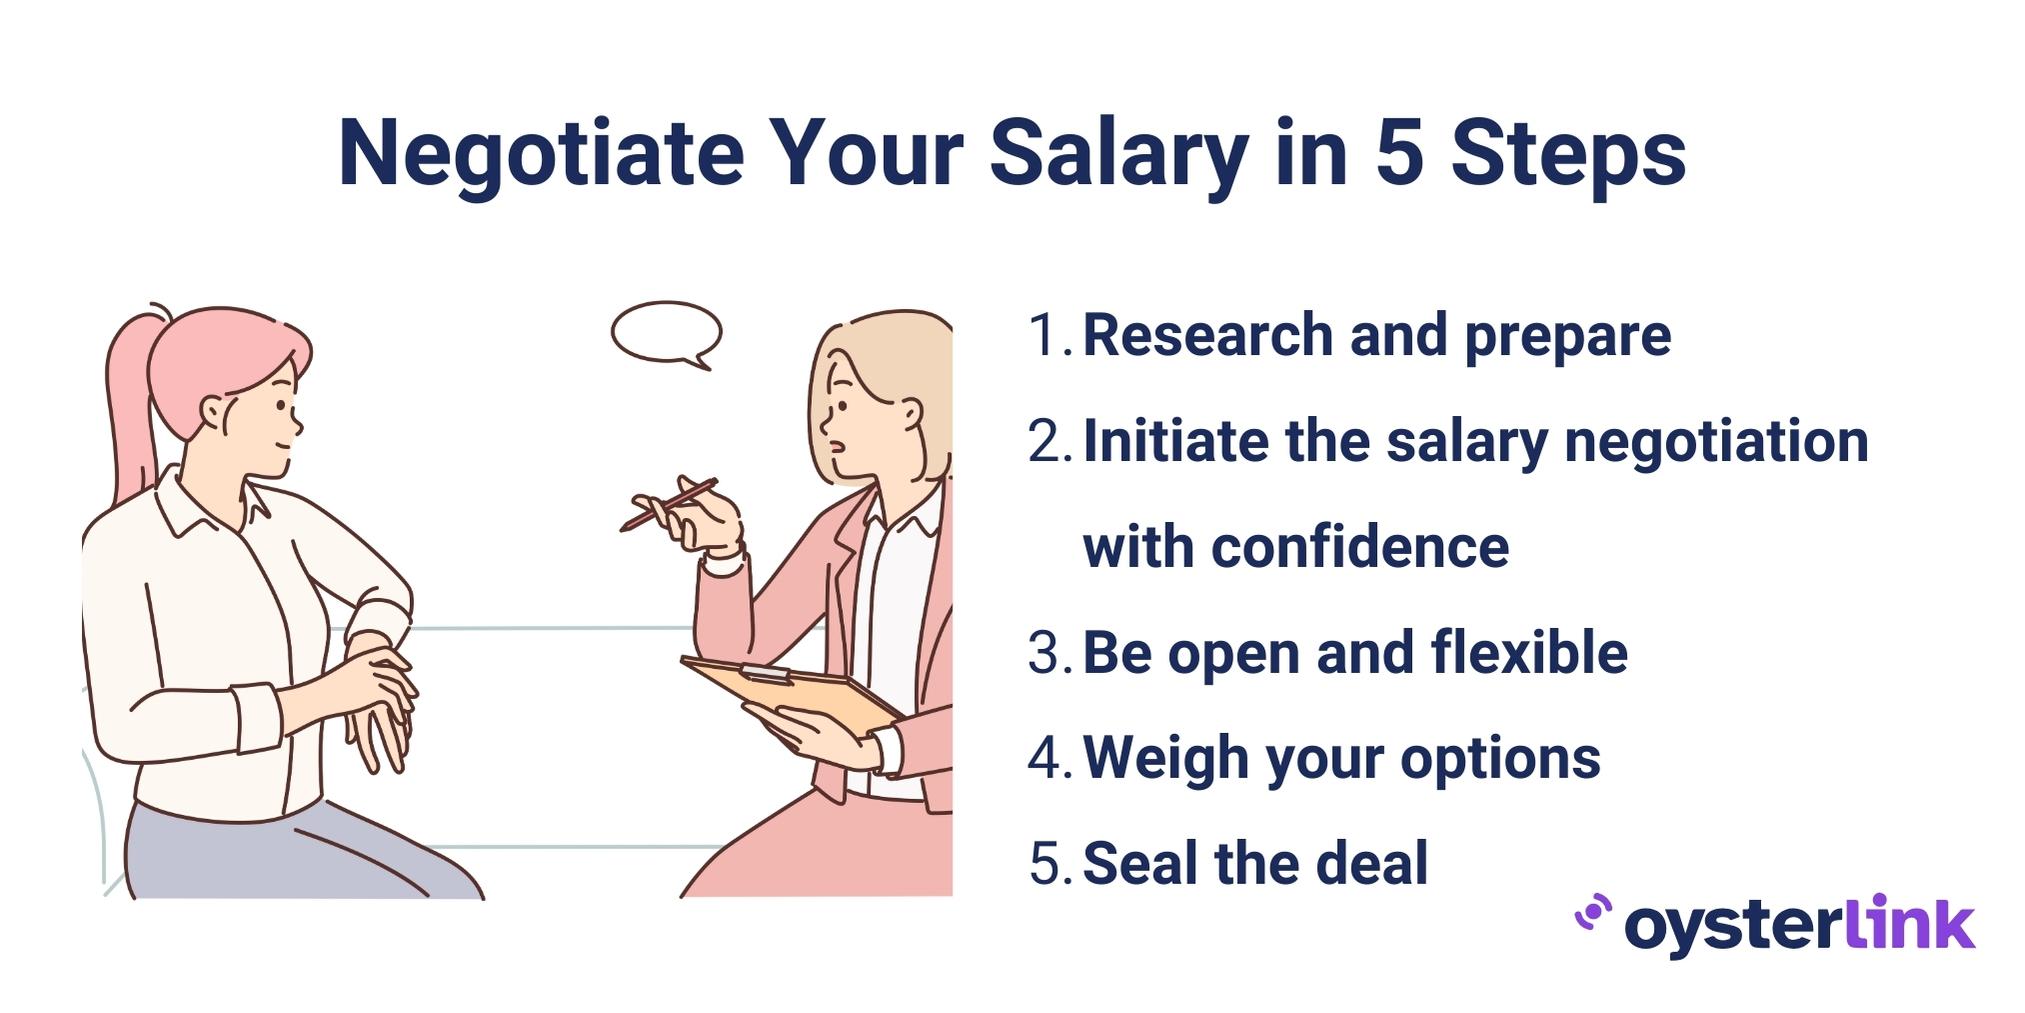 A graphic showing the 5 steps to negotiate salary